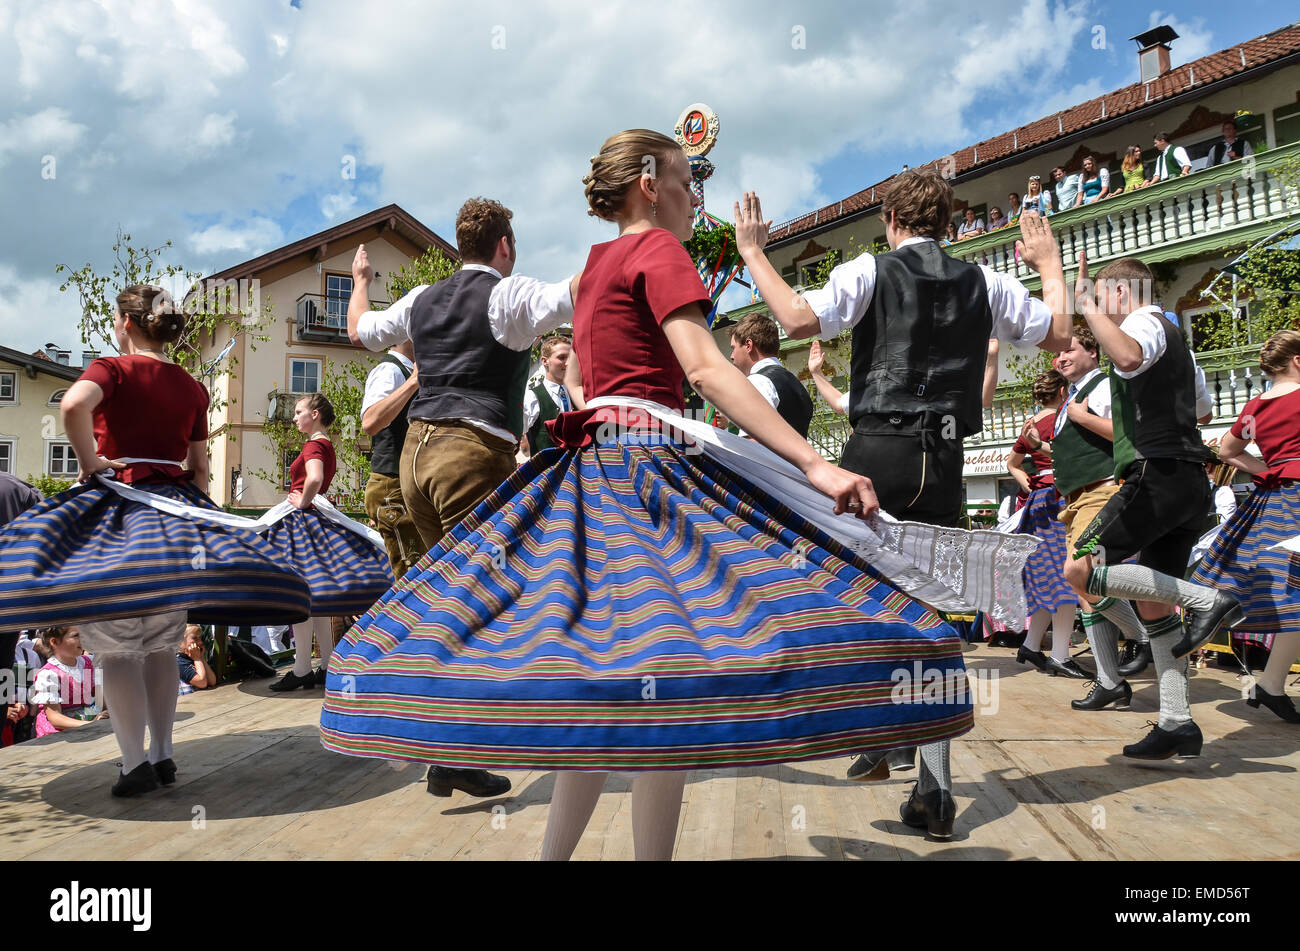 The Schuhplattler is a traditional folk dance popular in the Alpine regions  of Bavaria, here on the Market square of Miesbach Stock Photo - Alamy